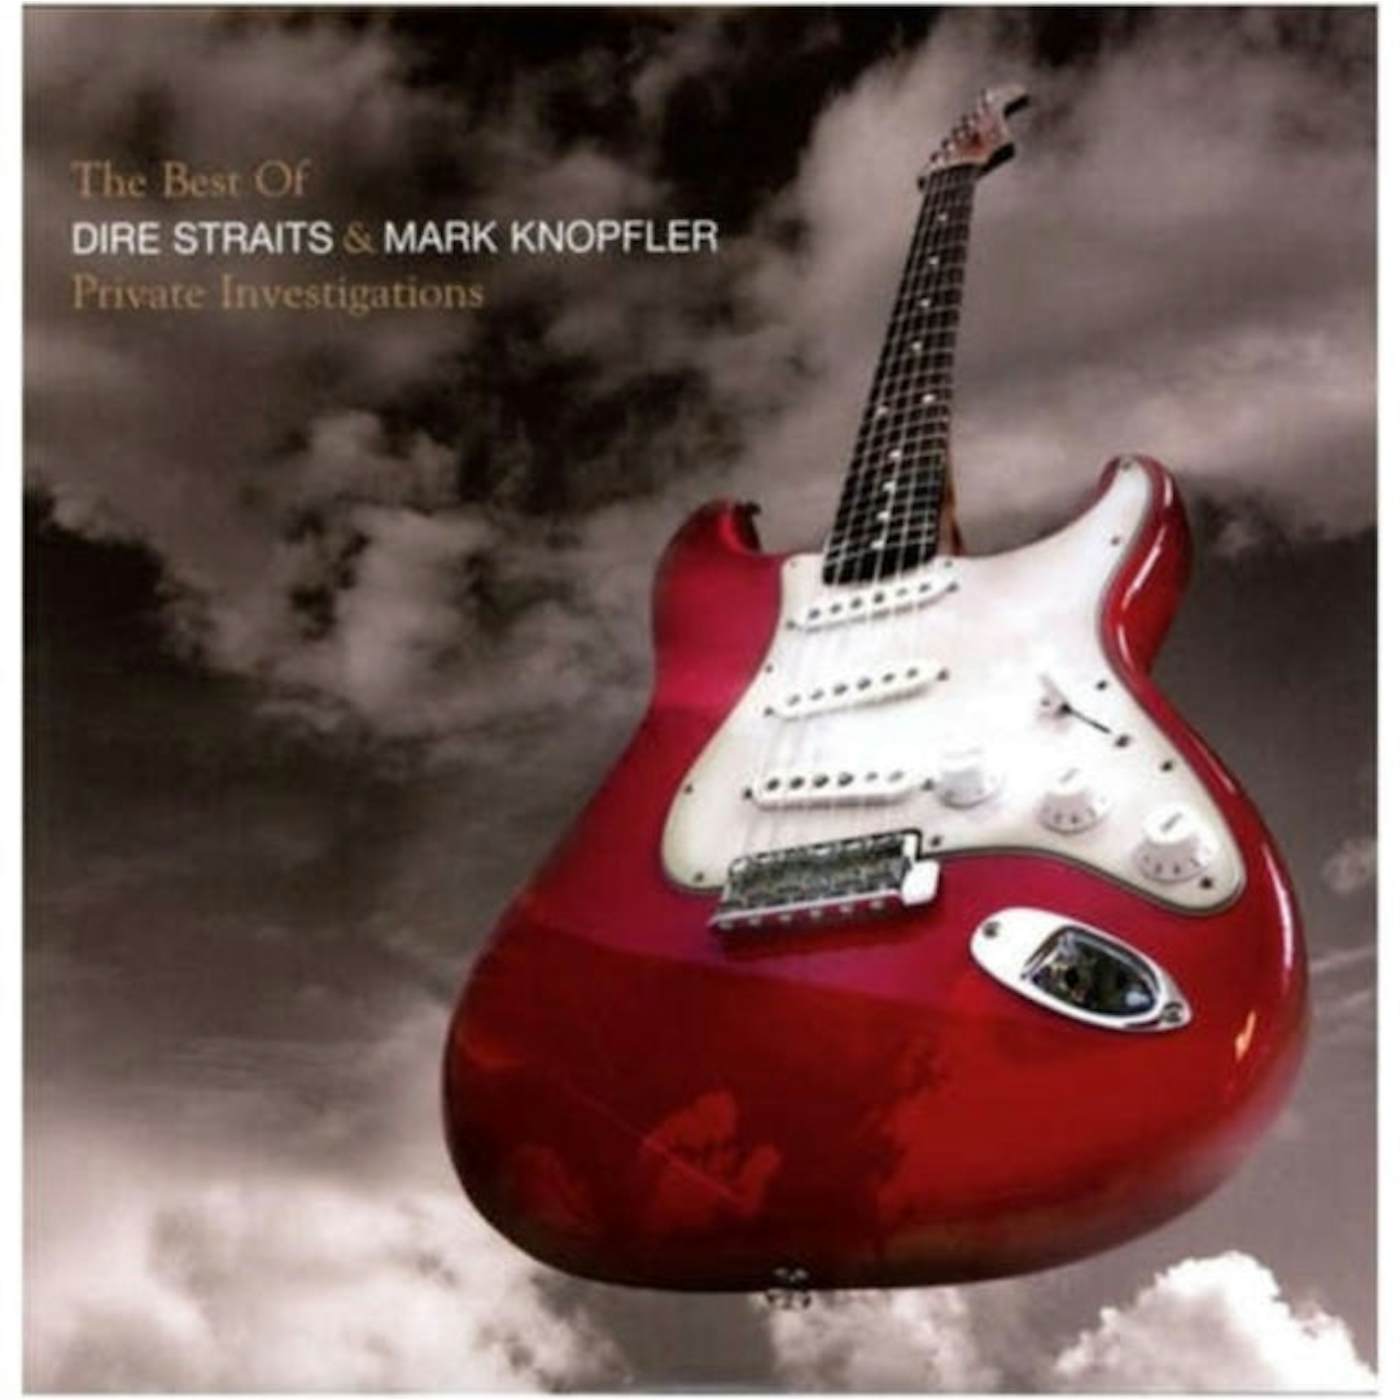 Dire Straits & Mark Knopfler LP Vinyl Record - Private Investigations - The Best Of